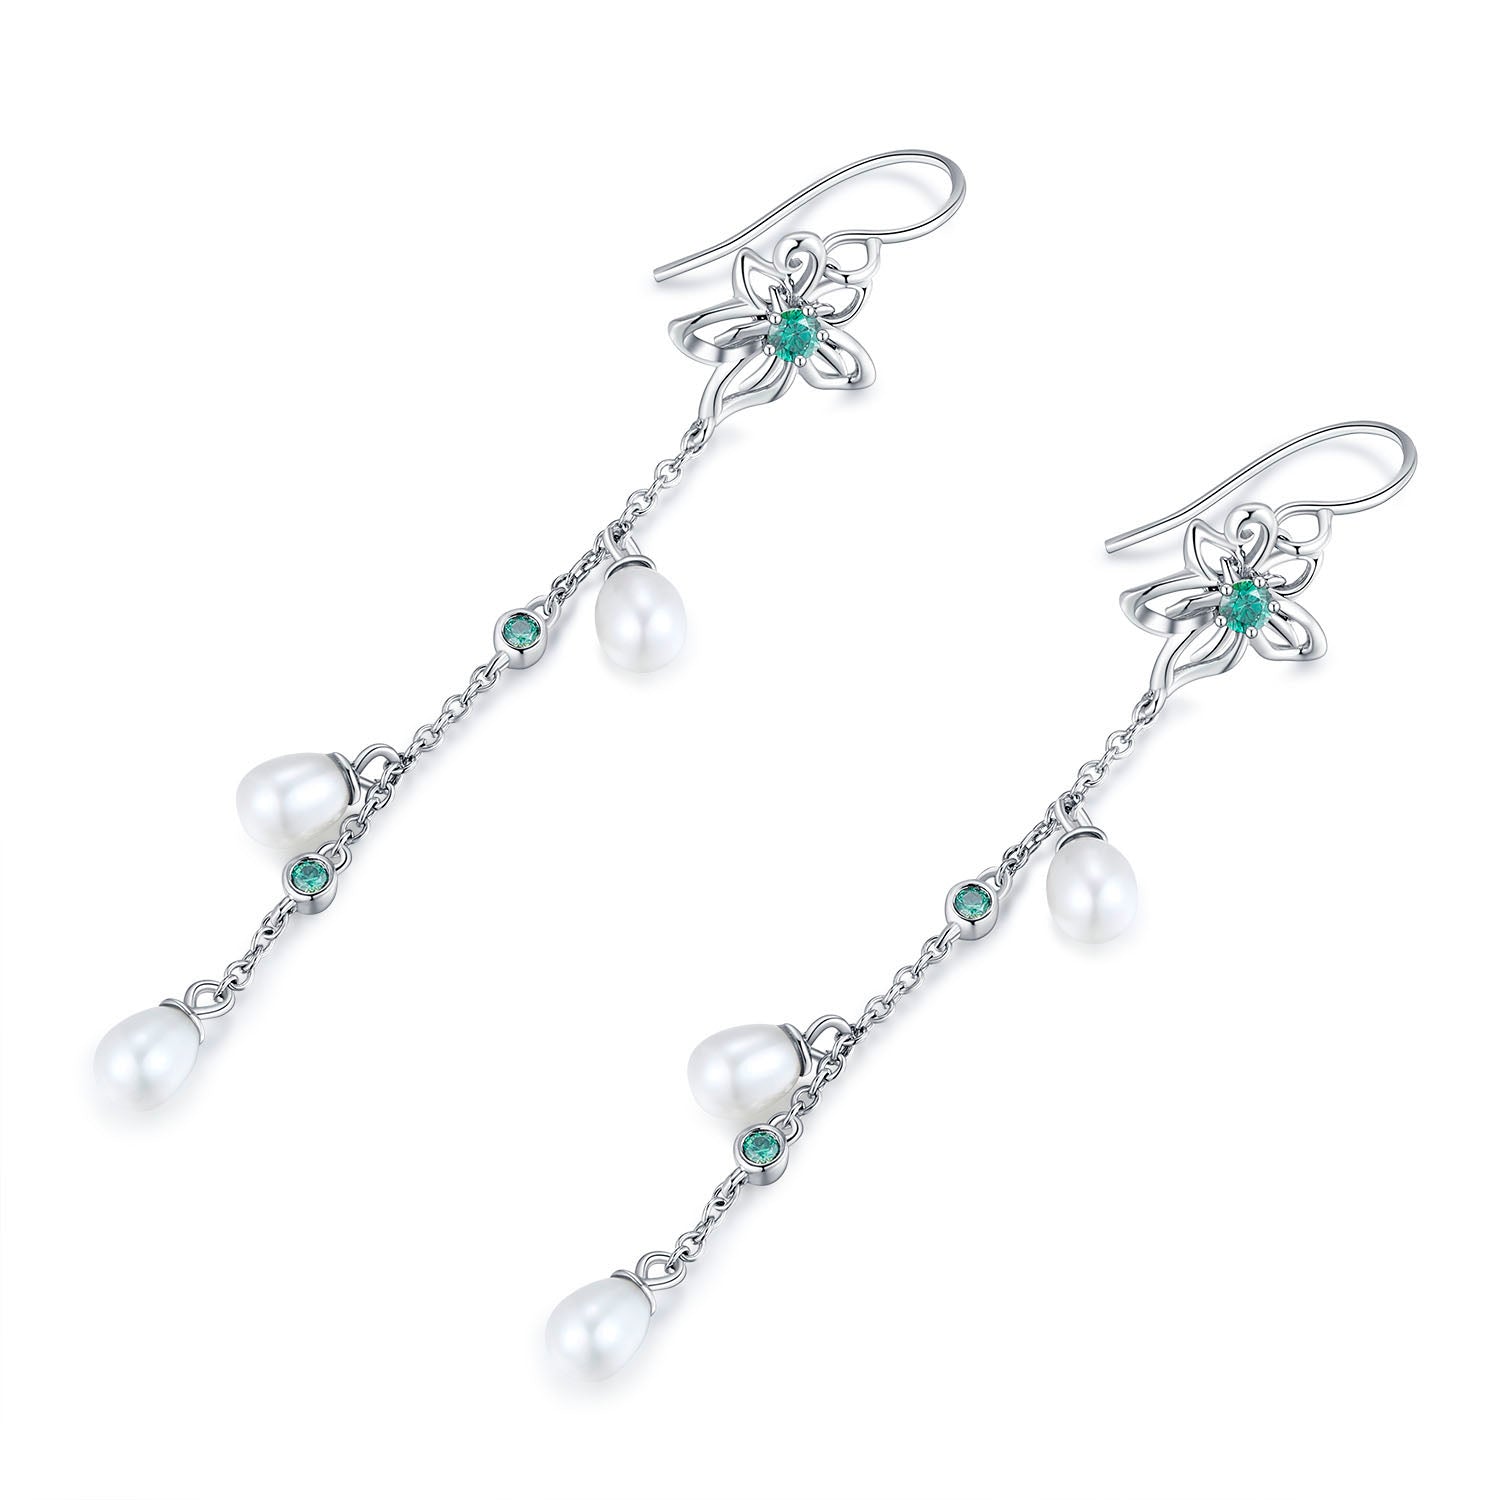 Vicacci 925 Silver Bauhinia Lotus Seed Earrings with Swarovski Green Crystals